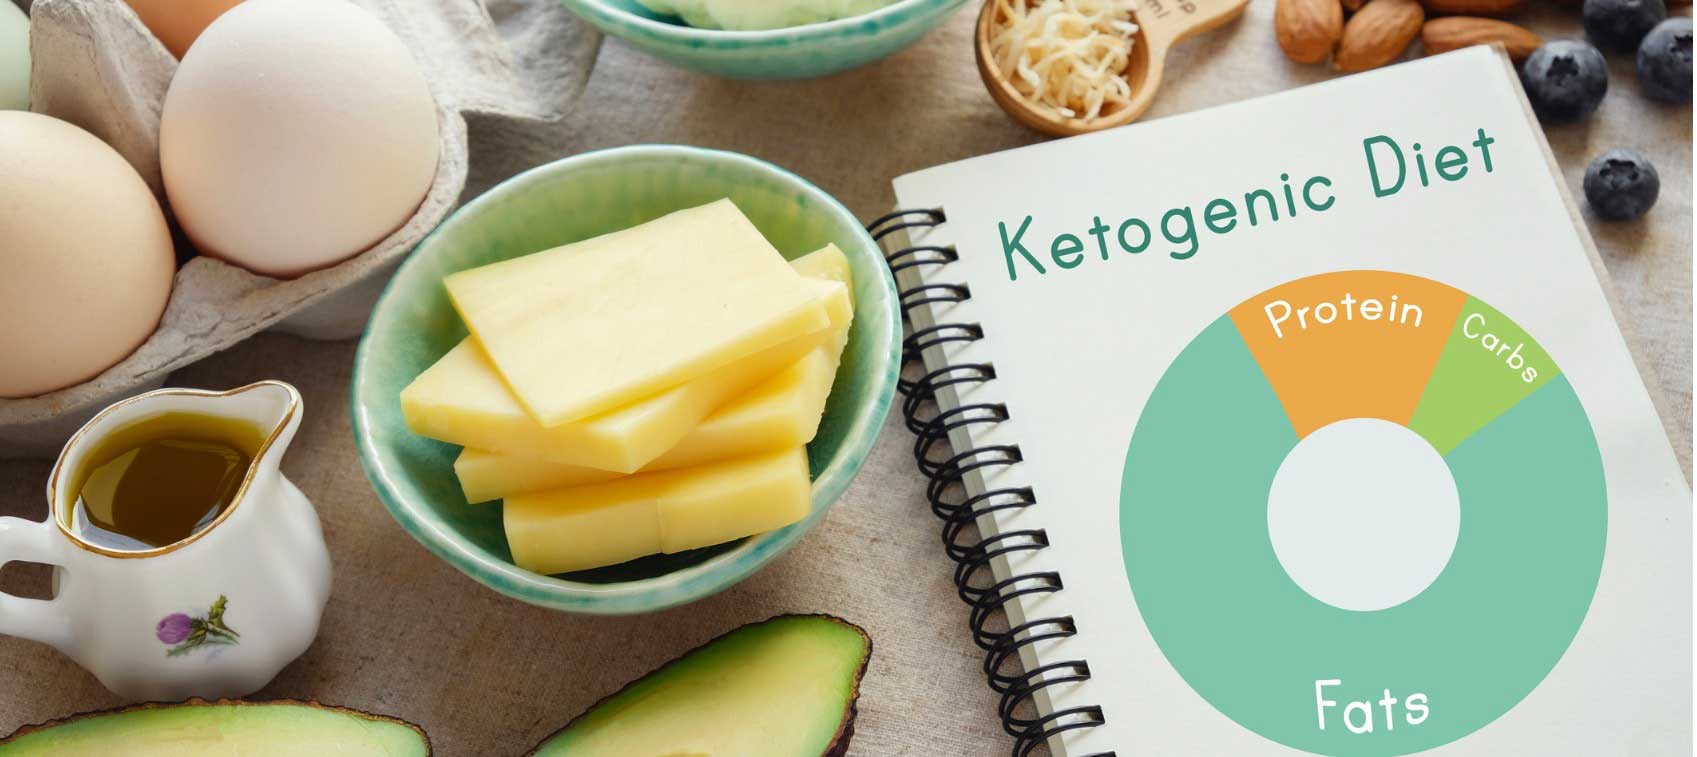 Is the Keto Diet Safe? How to Avoid Common Issues